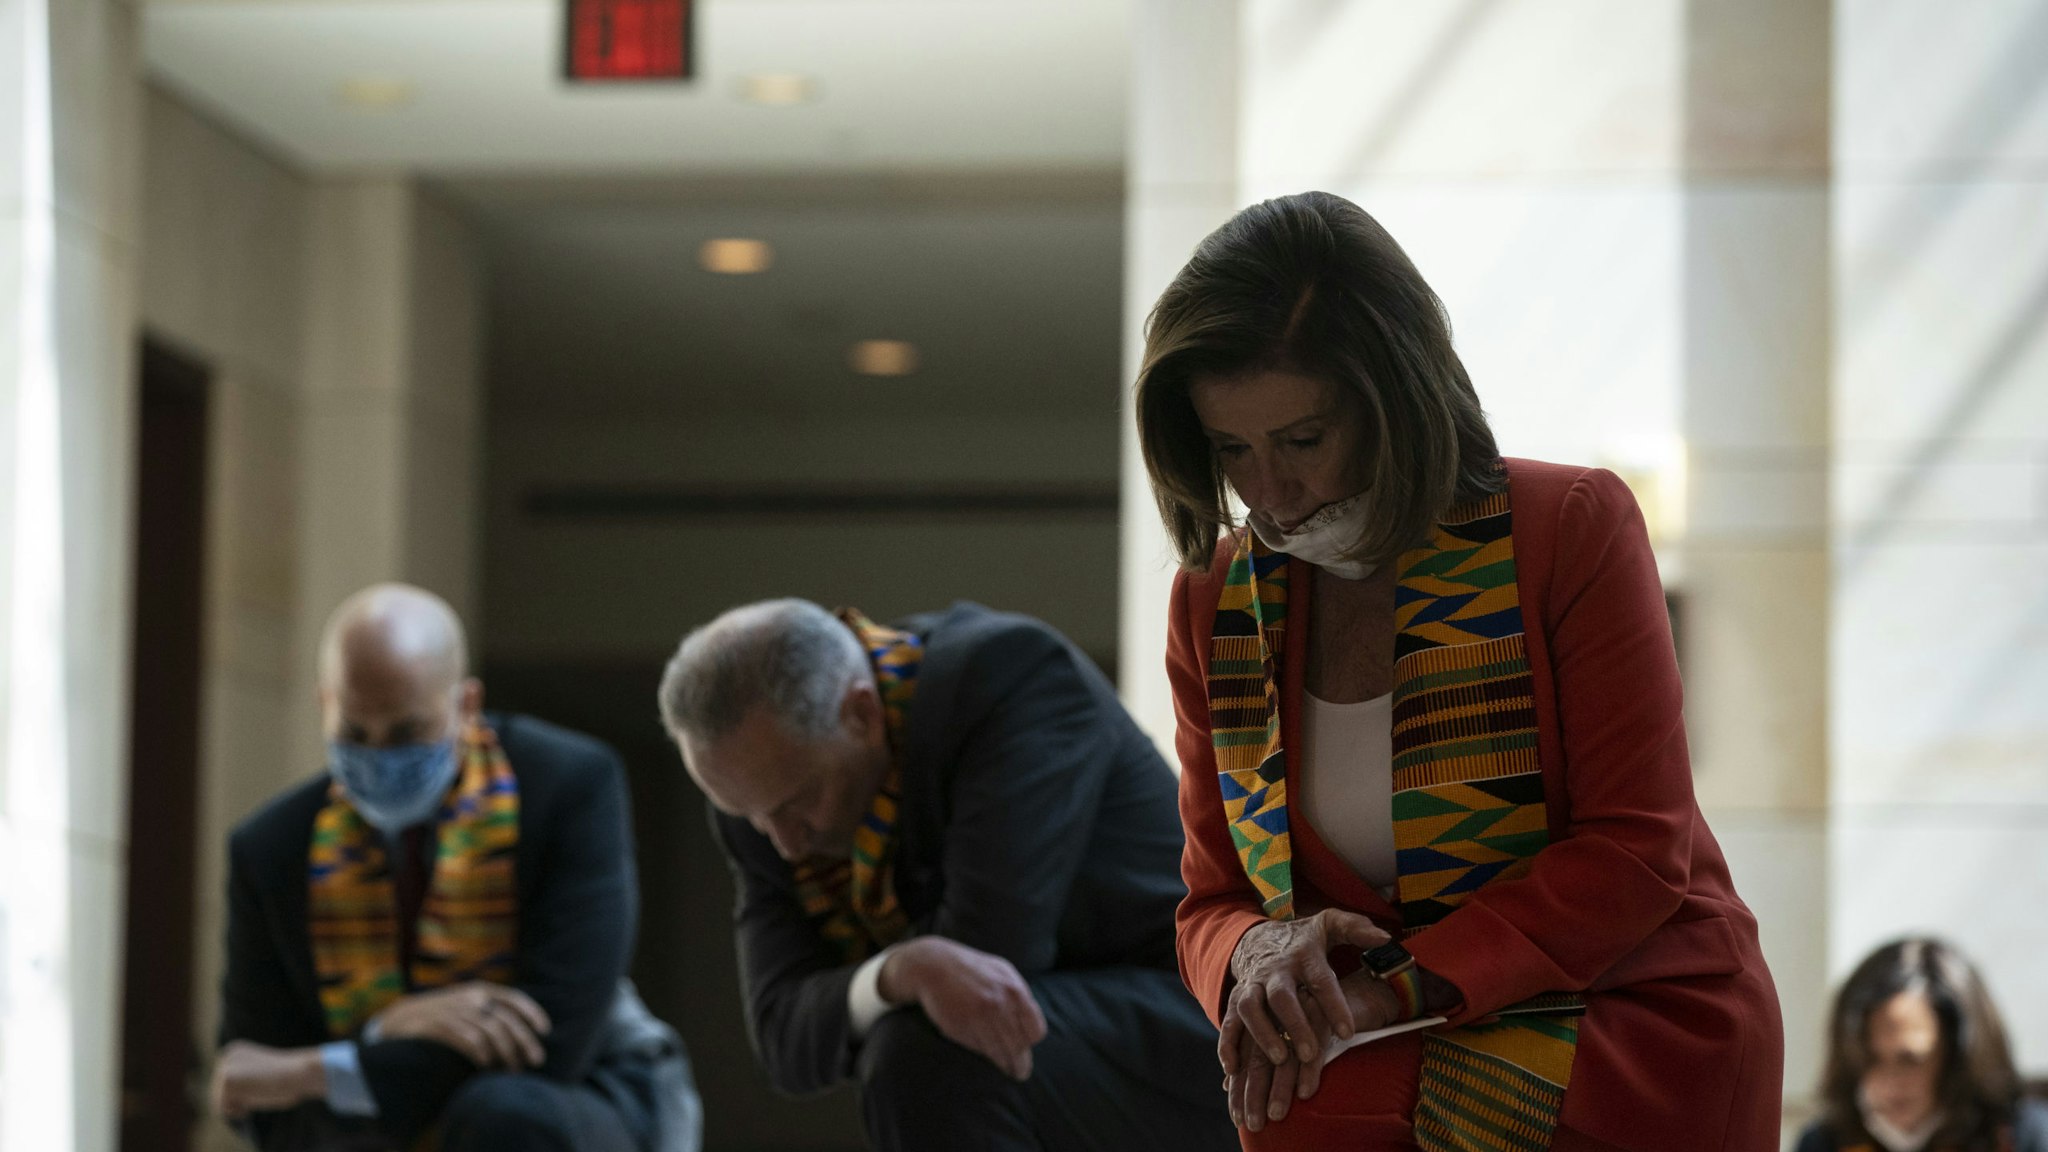 U.S. House Speaker Nancy Pelosi, a Democrat from California, and House and Senate Democrats bow their heads during a moment of silence in Emancipation Hall at the U.S. Capitol in Washington, D.C., U.S., on Monday, June 8, 2020. Democratic lawmakers plan to release a broad police overhaul bill today, hoping to turn the energy of the nationwide Black Lives Matter demonstrations into concrete legal changes that could make it easier to prosecute police abuse and misconduct, a Democratic aide said yesterday. Photographer: Al Drago/Bloomberg via Getty Images